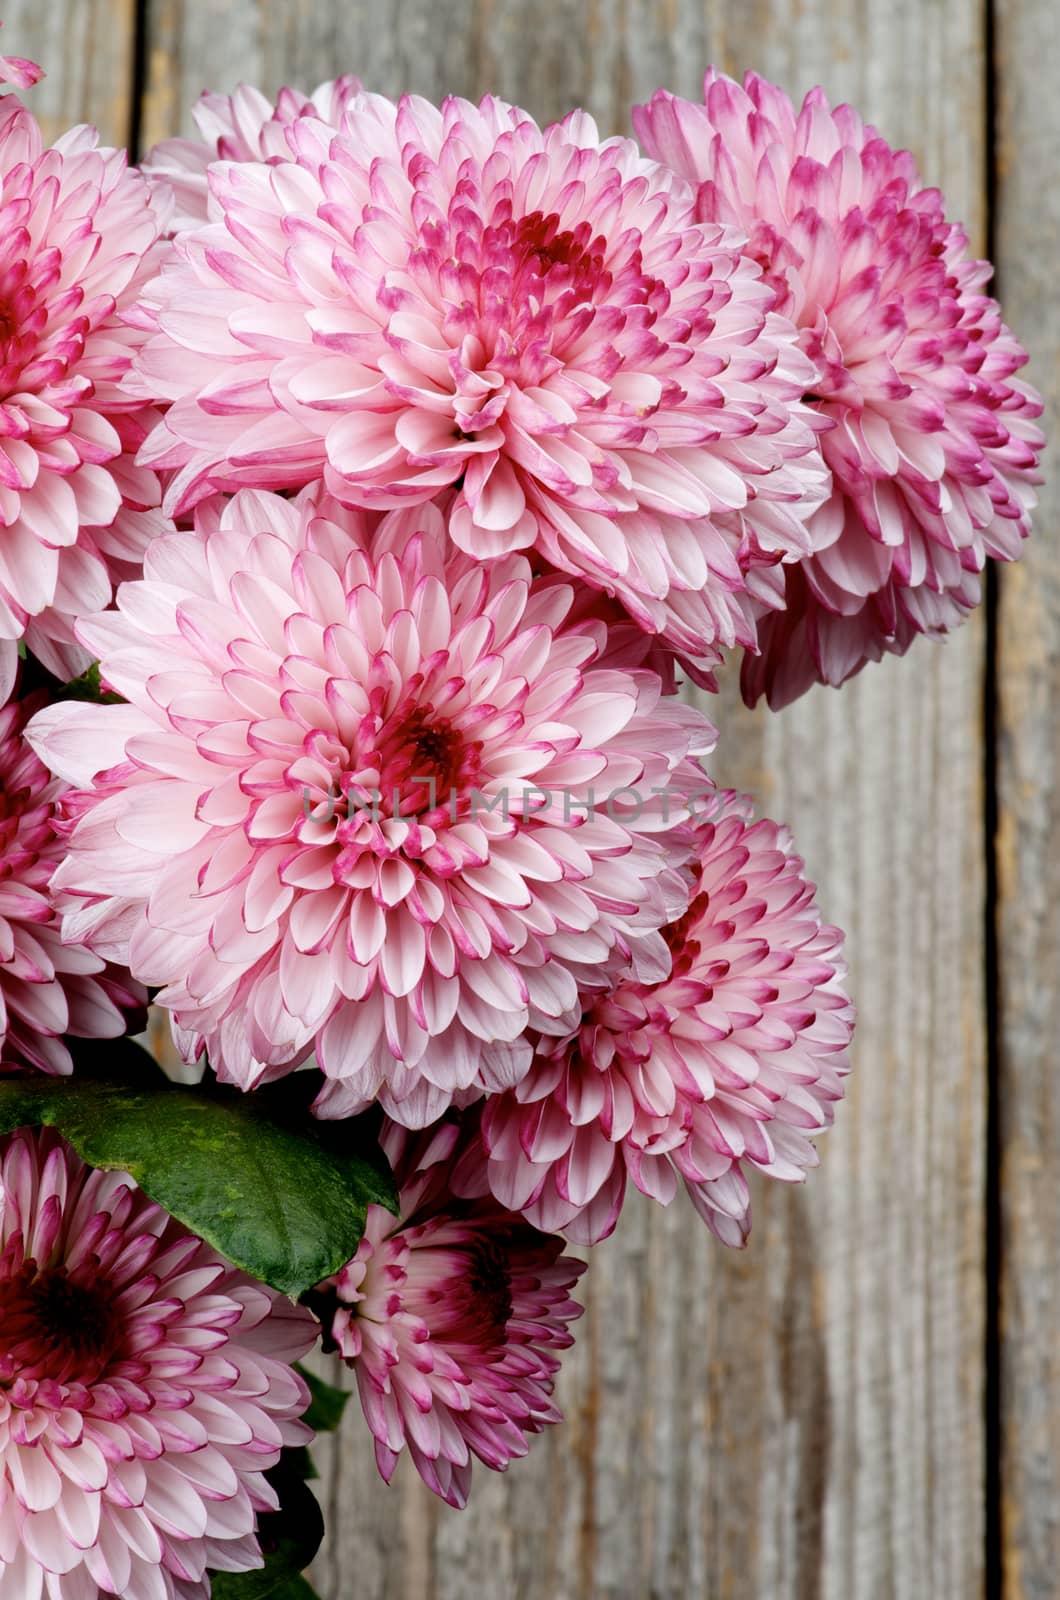 Bunch of Big Beautiful Pink and Red Chrysanthemum closeup on Rustic Wooden background